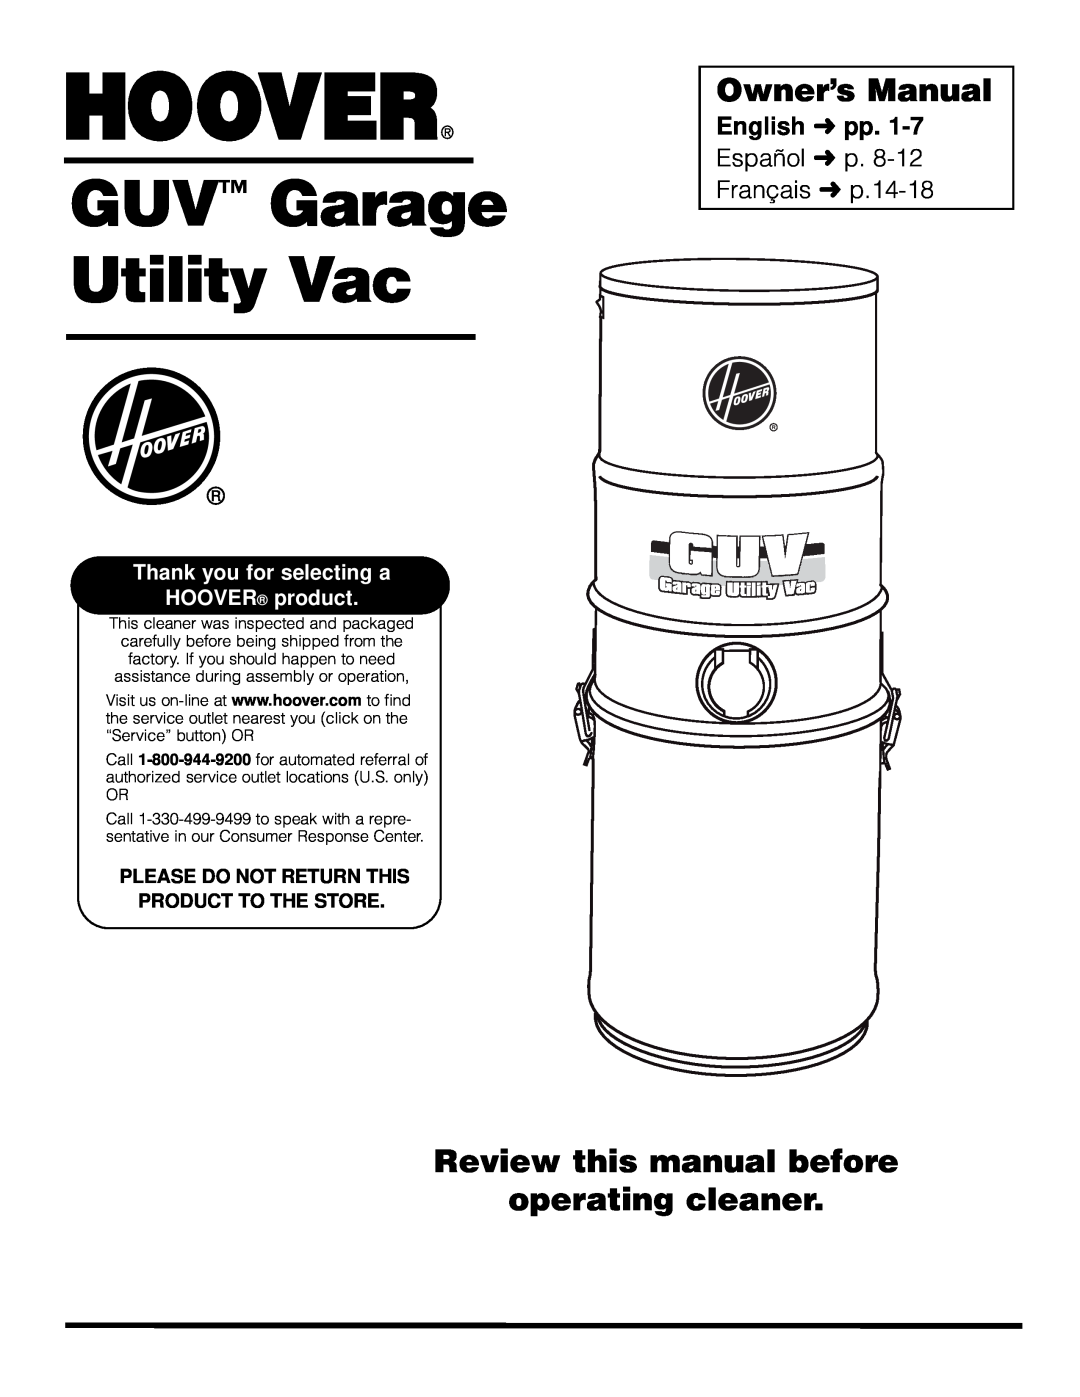 Hoover L2310 owner manual Owner’s Manual, Review this manual before operating cleaner, GUV Garage Utility Vac 